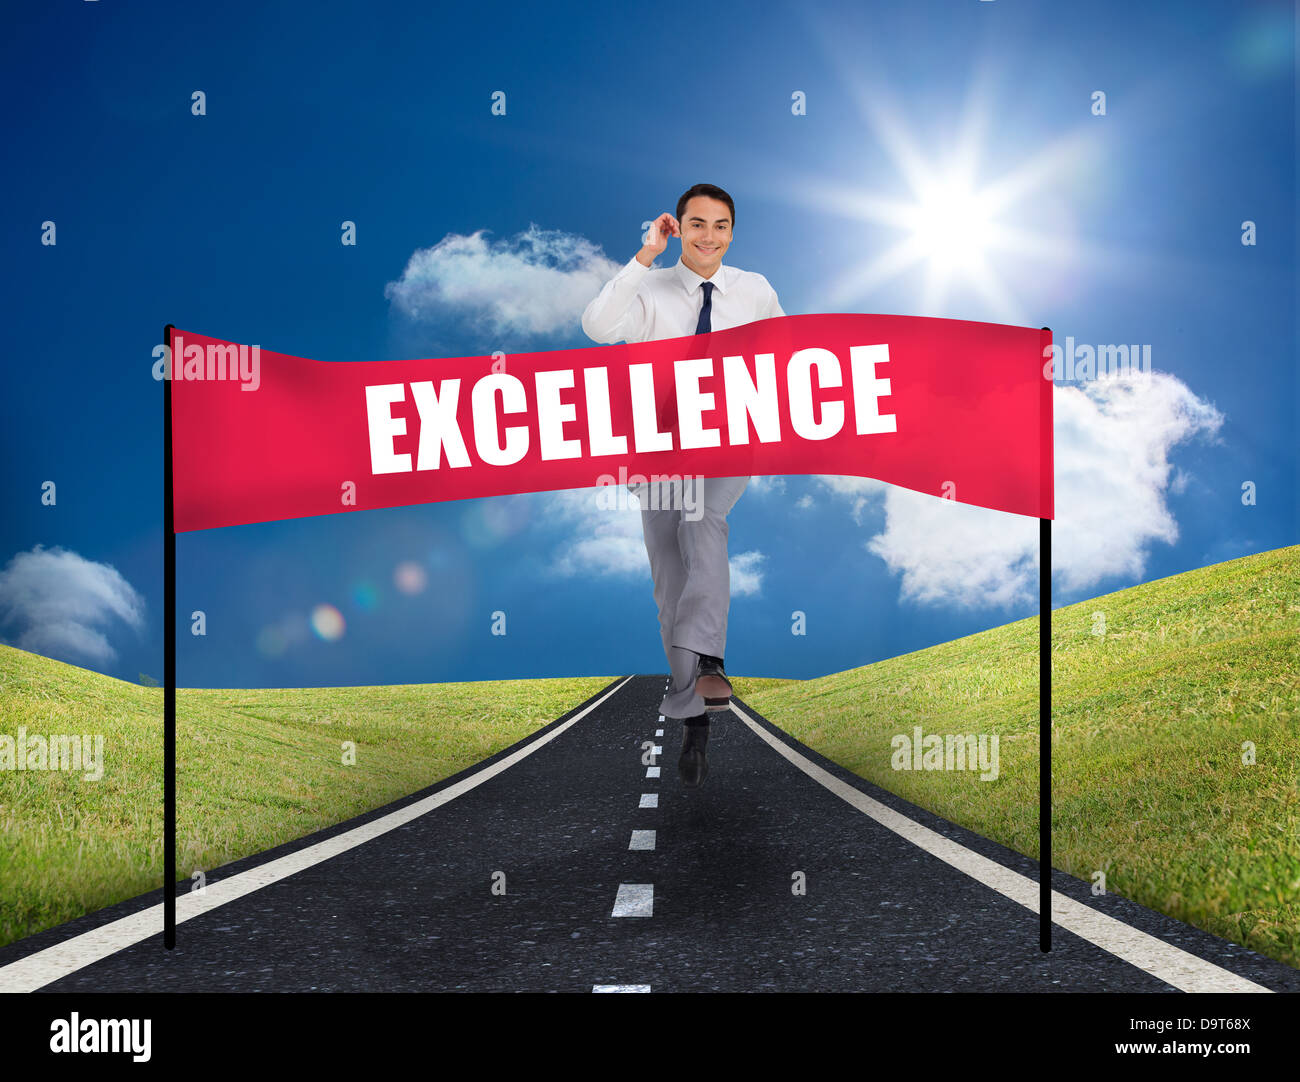 Businessman reaching a banner with excellence written on it Stock Photo